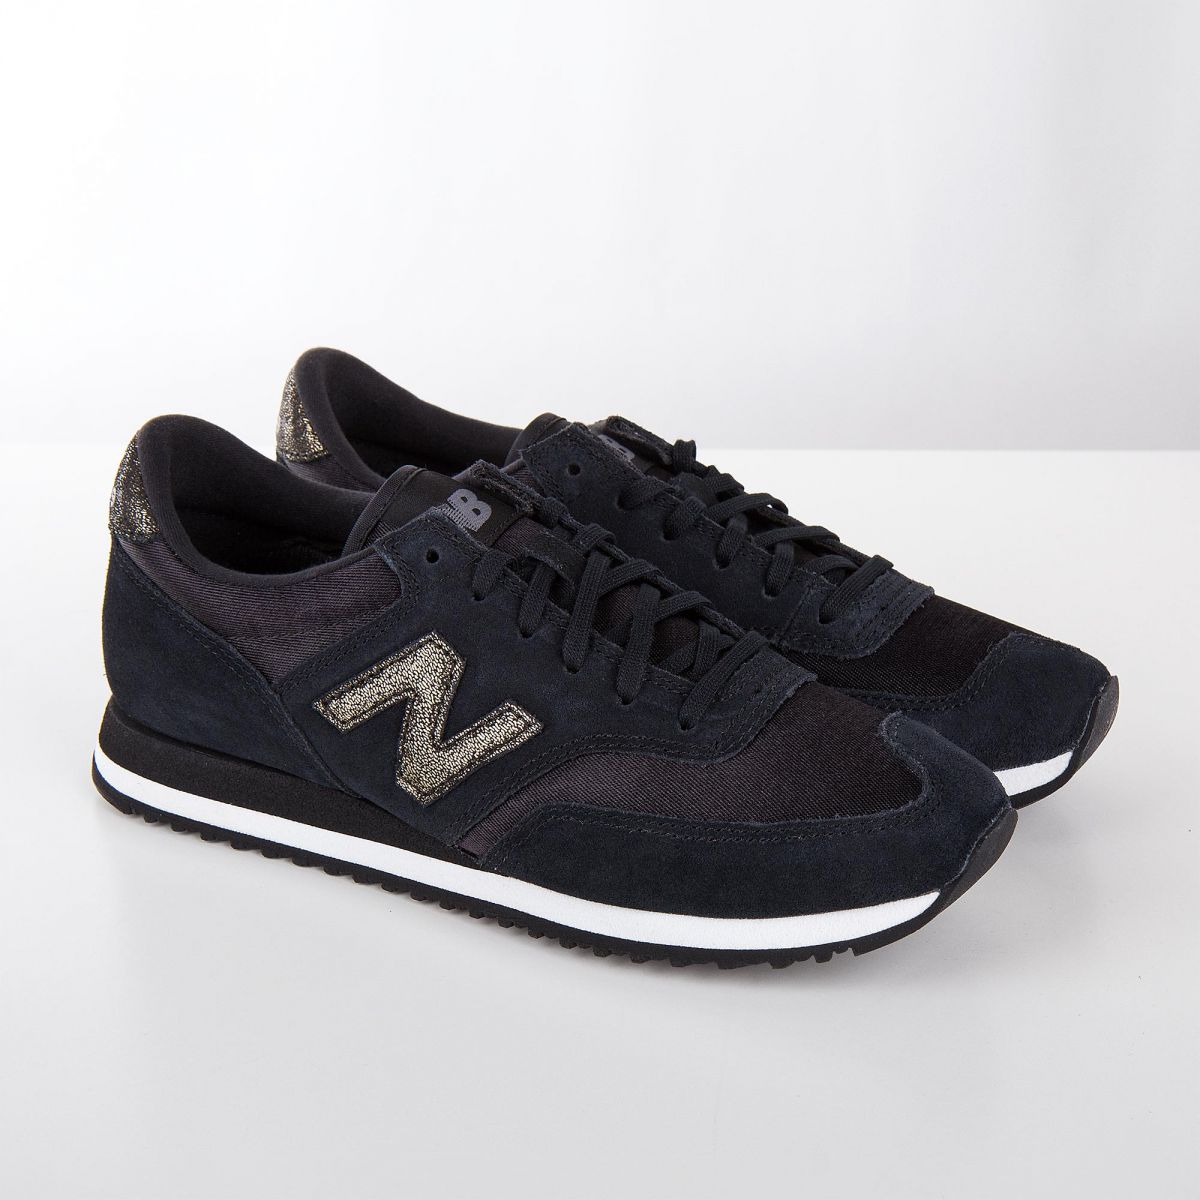 new balance paillette, OFF 72%,where to buy!